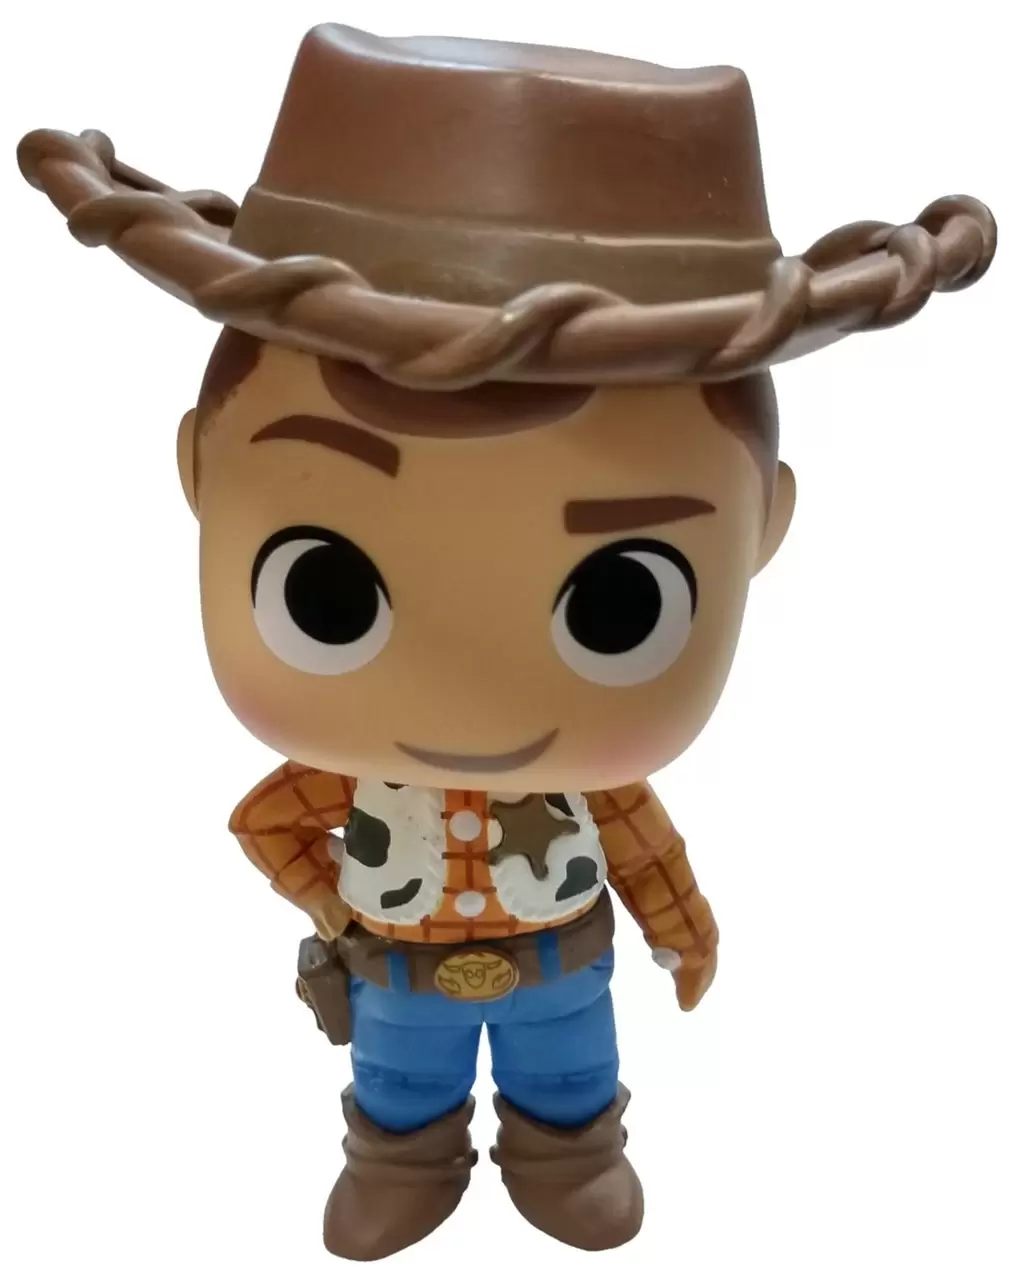 Mystery Minis - Toy story 4 - Woody